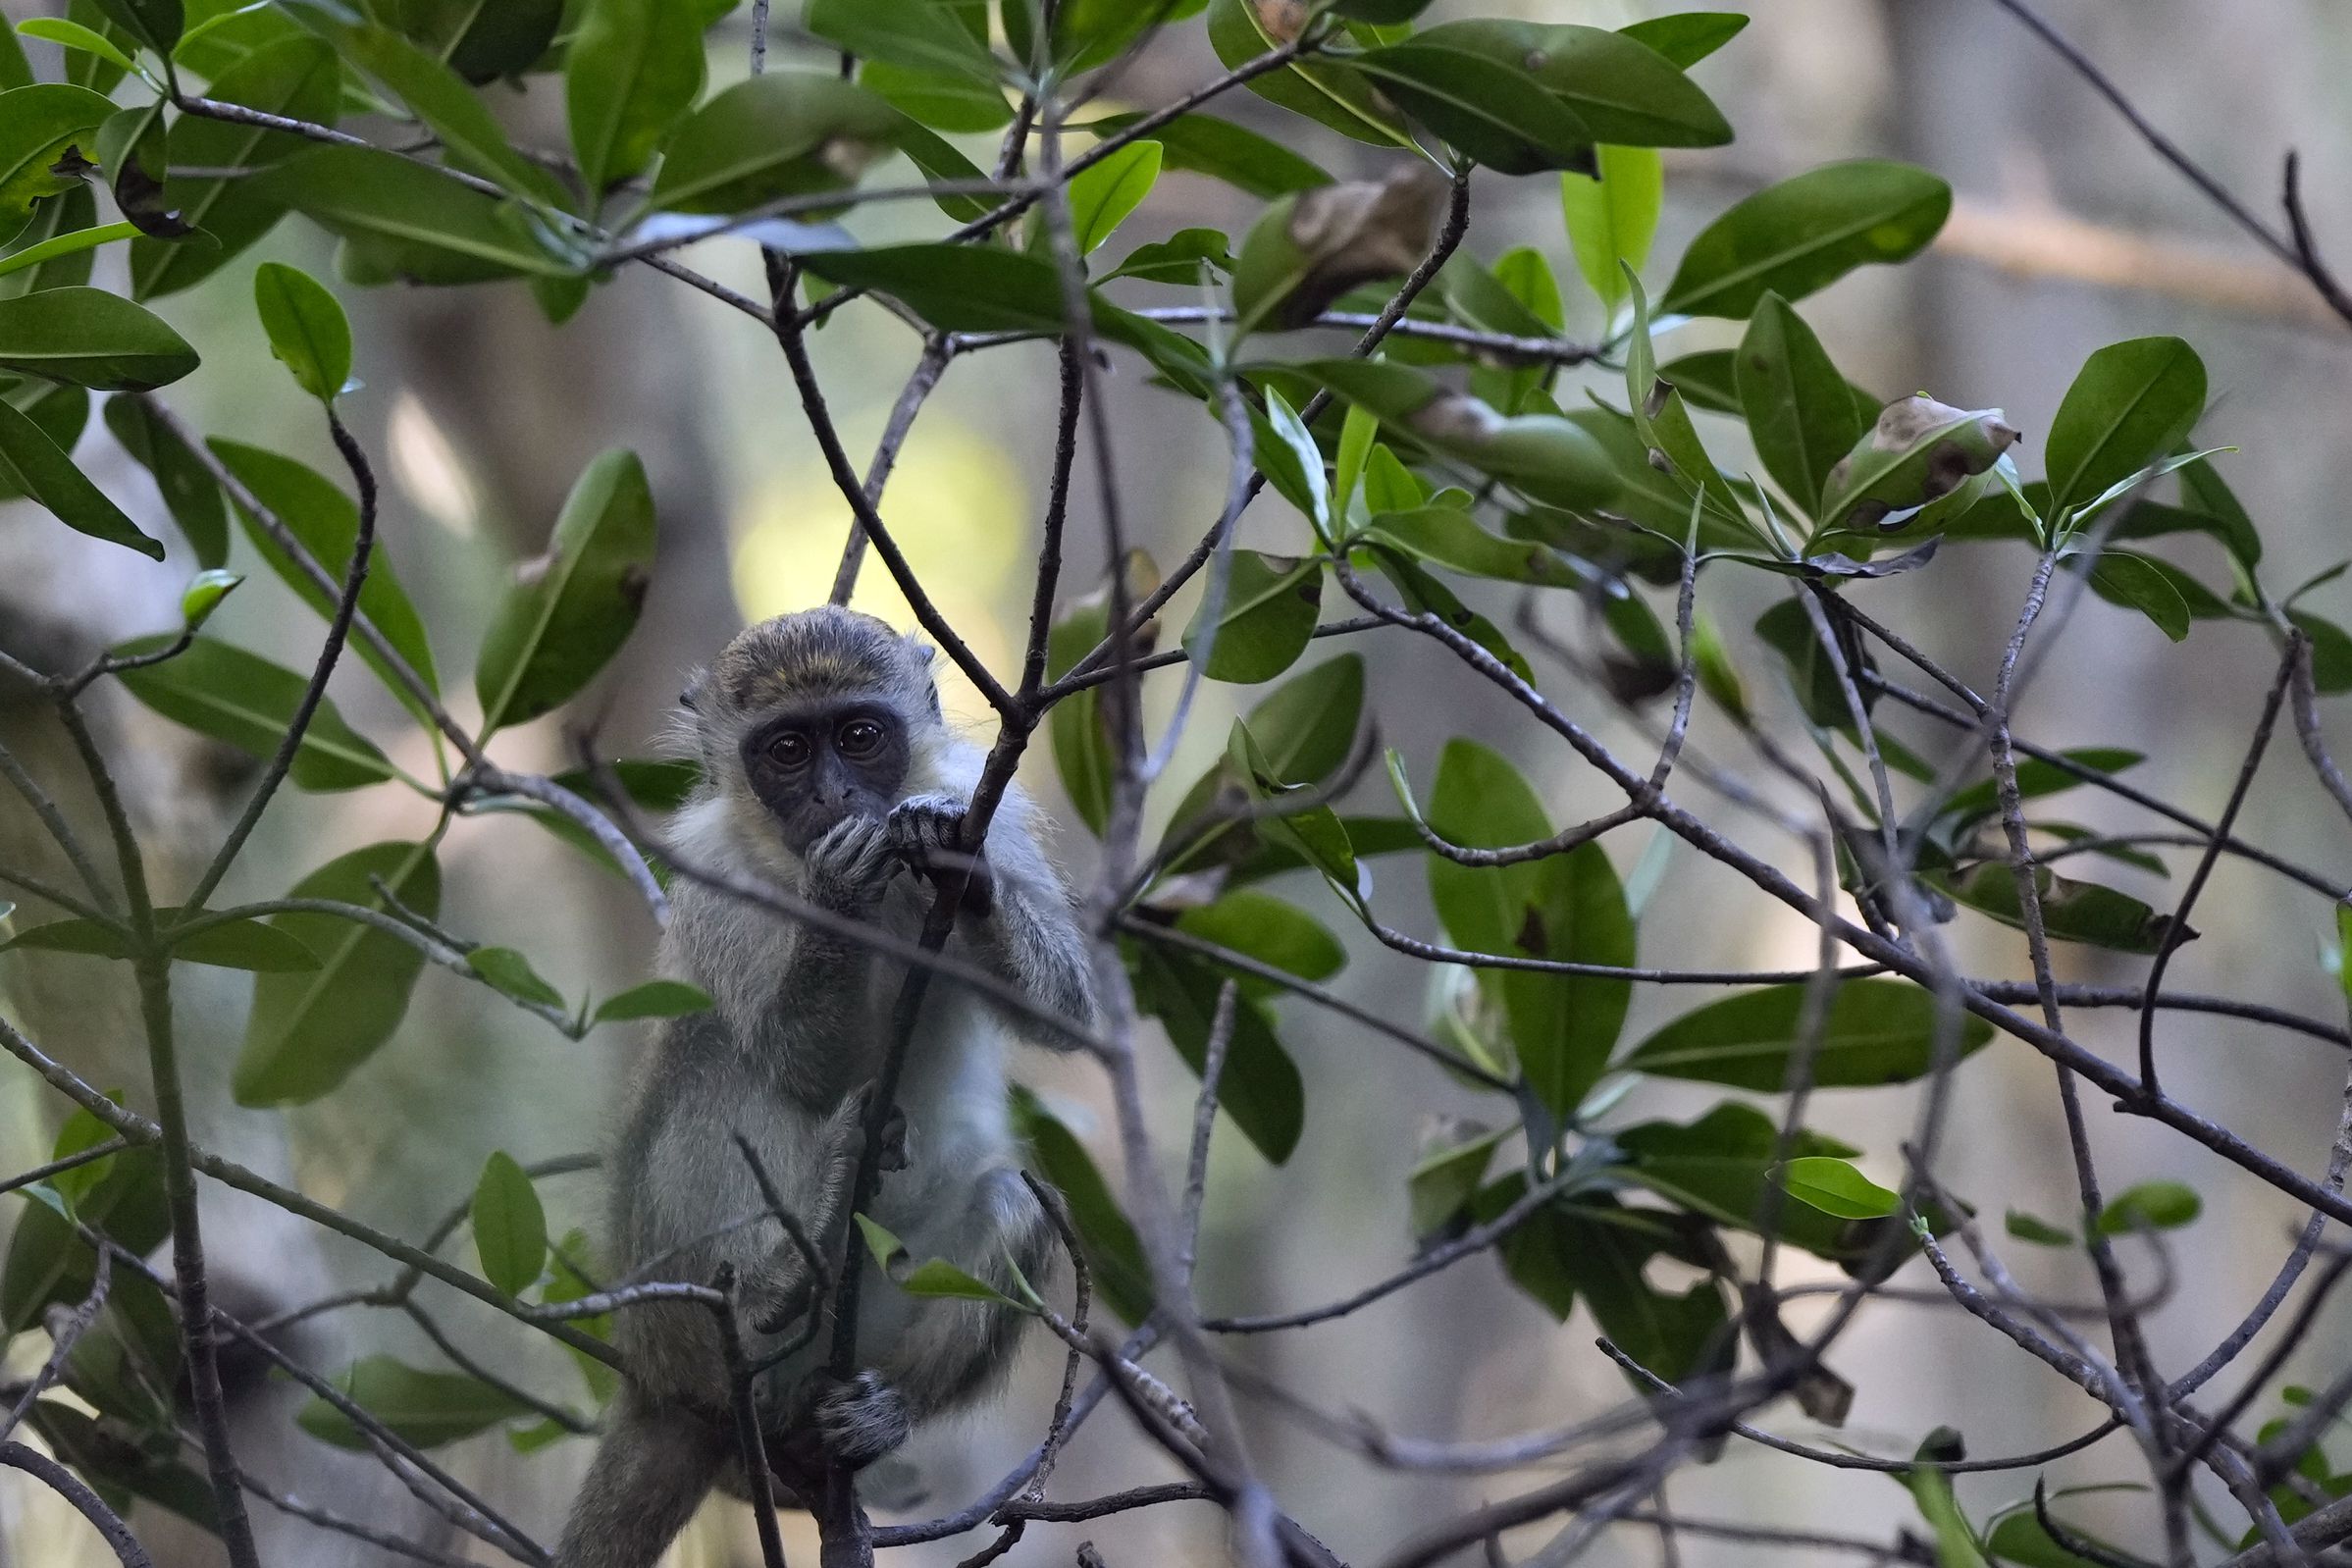 Monkeys in Florida include macaques, squirrel and vervet species